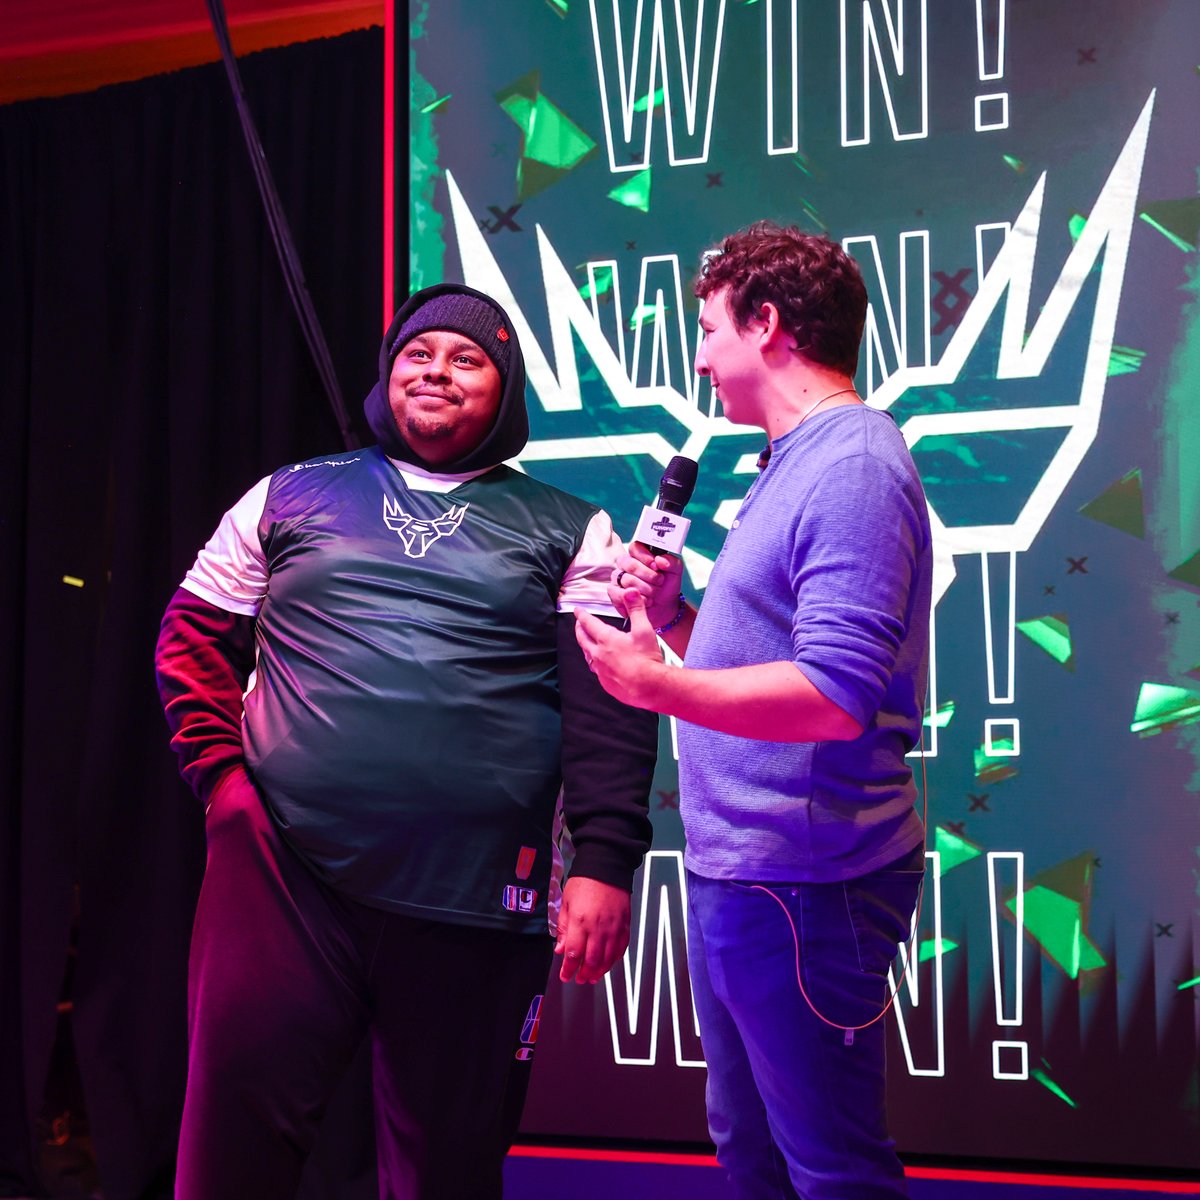 The NBA 2K League is BACK at District E for The TIPOFF from May 22-25 🏀 Get tickets today 🎟️ bit.ly/4blchrs